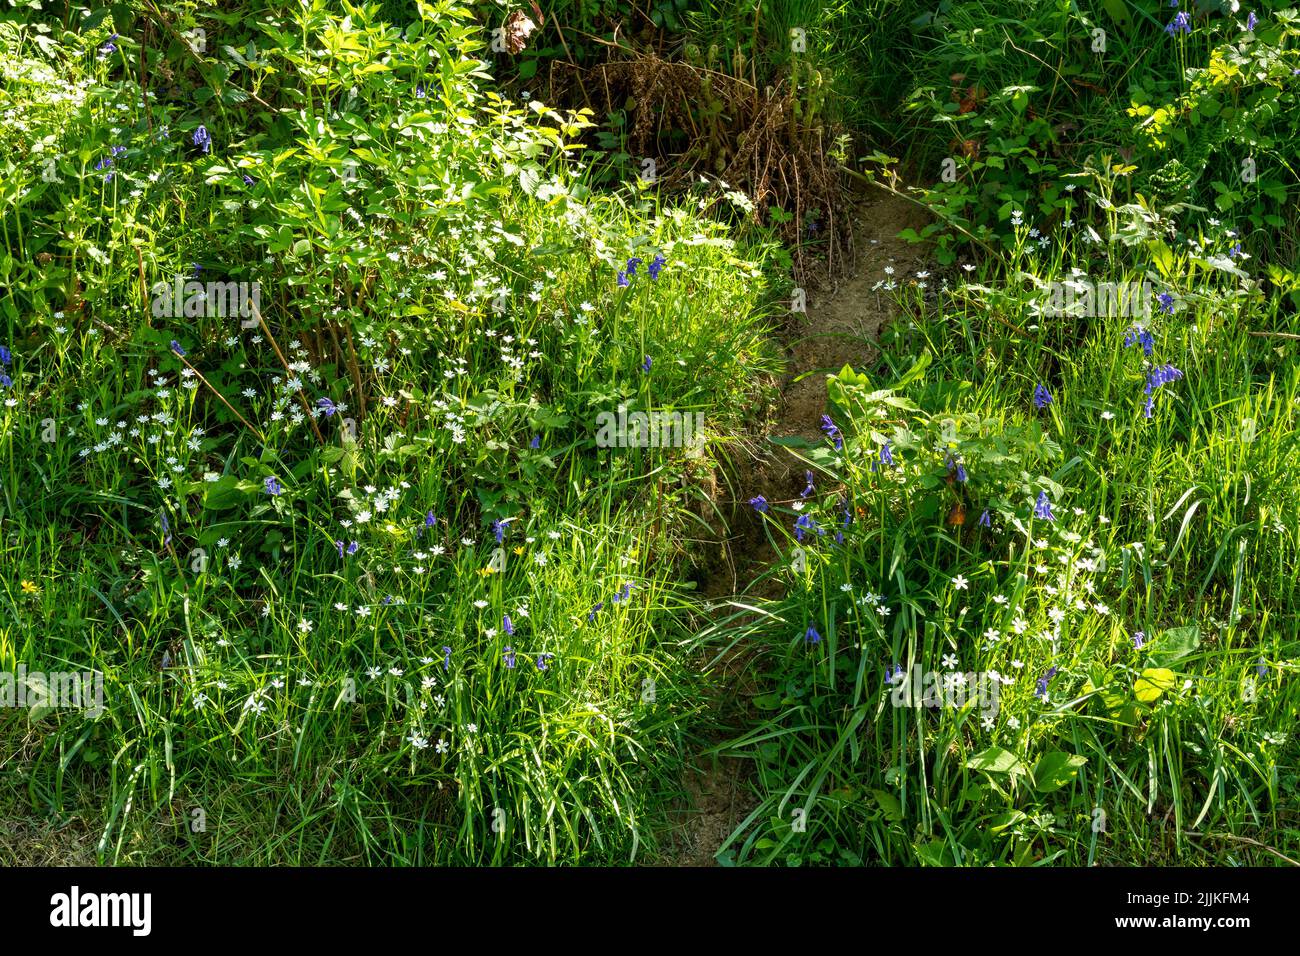 A grassy bank with stitchwort and bluebells Stock Photo